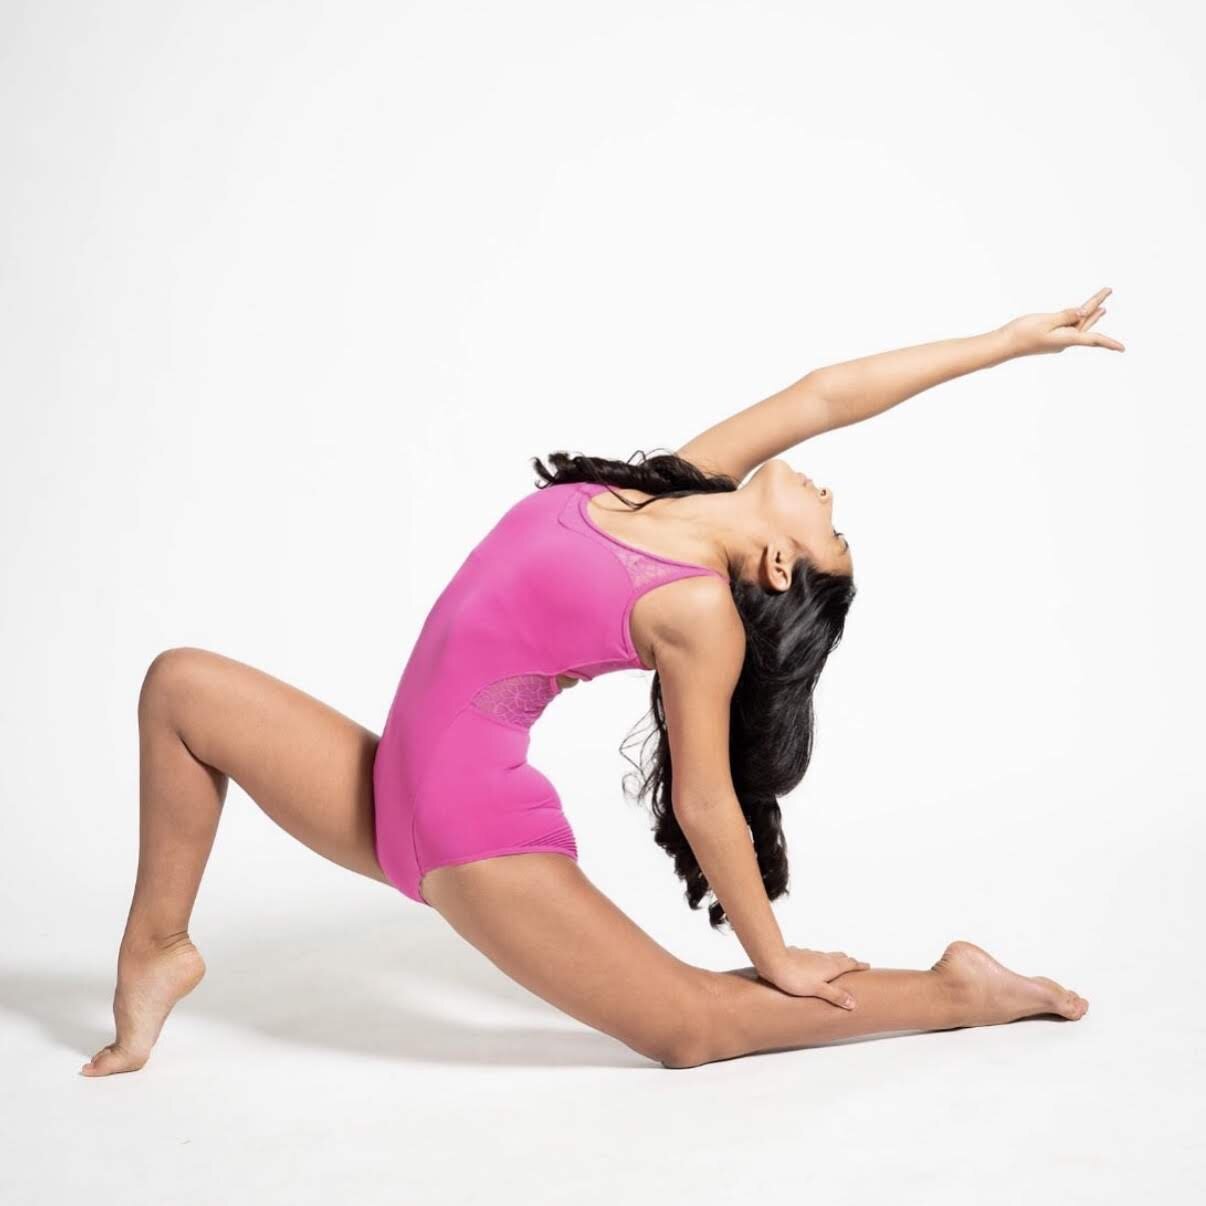 Dancer posing in a stretched pose. (Copy) (Copy) (Copy) (Copy) (Copy) (Copy) (Copy) (Copy)